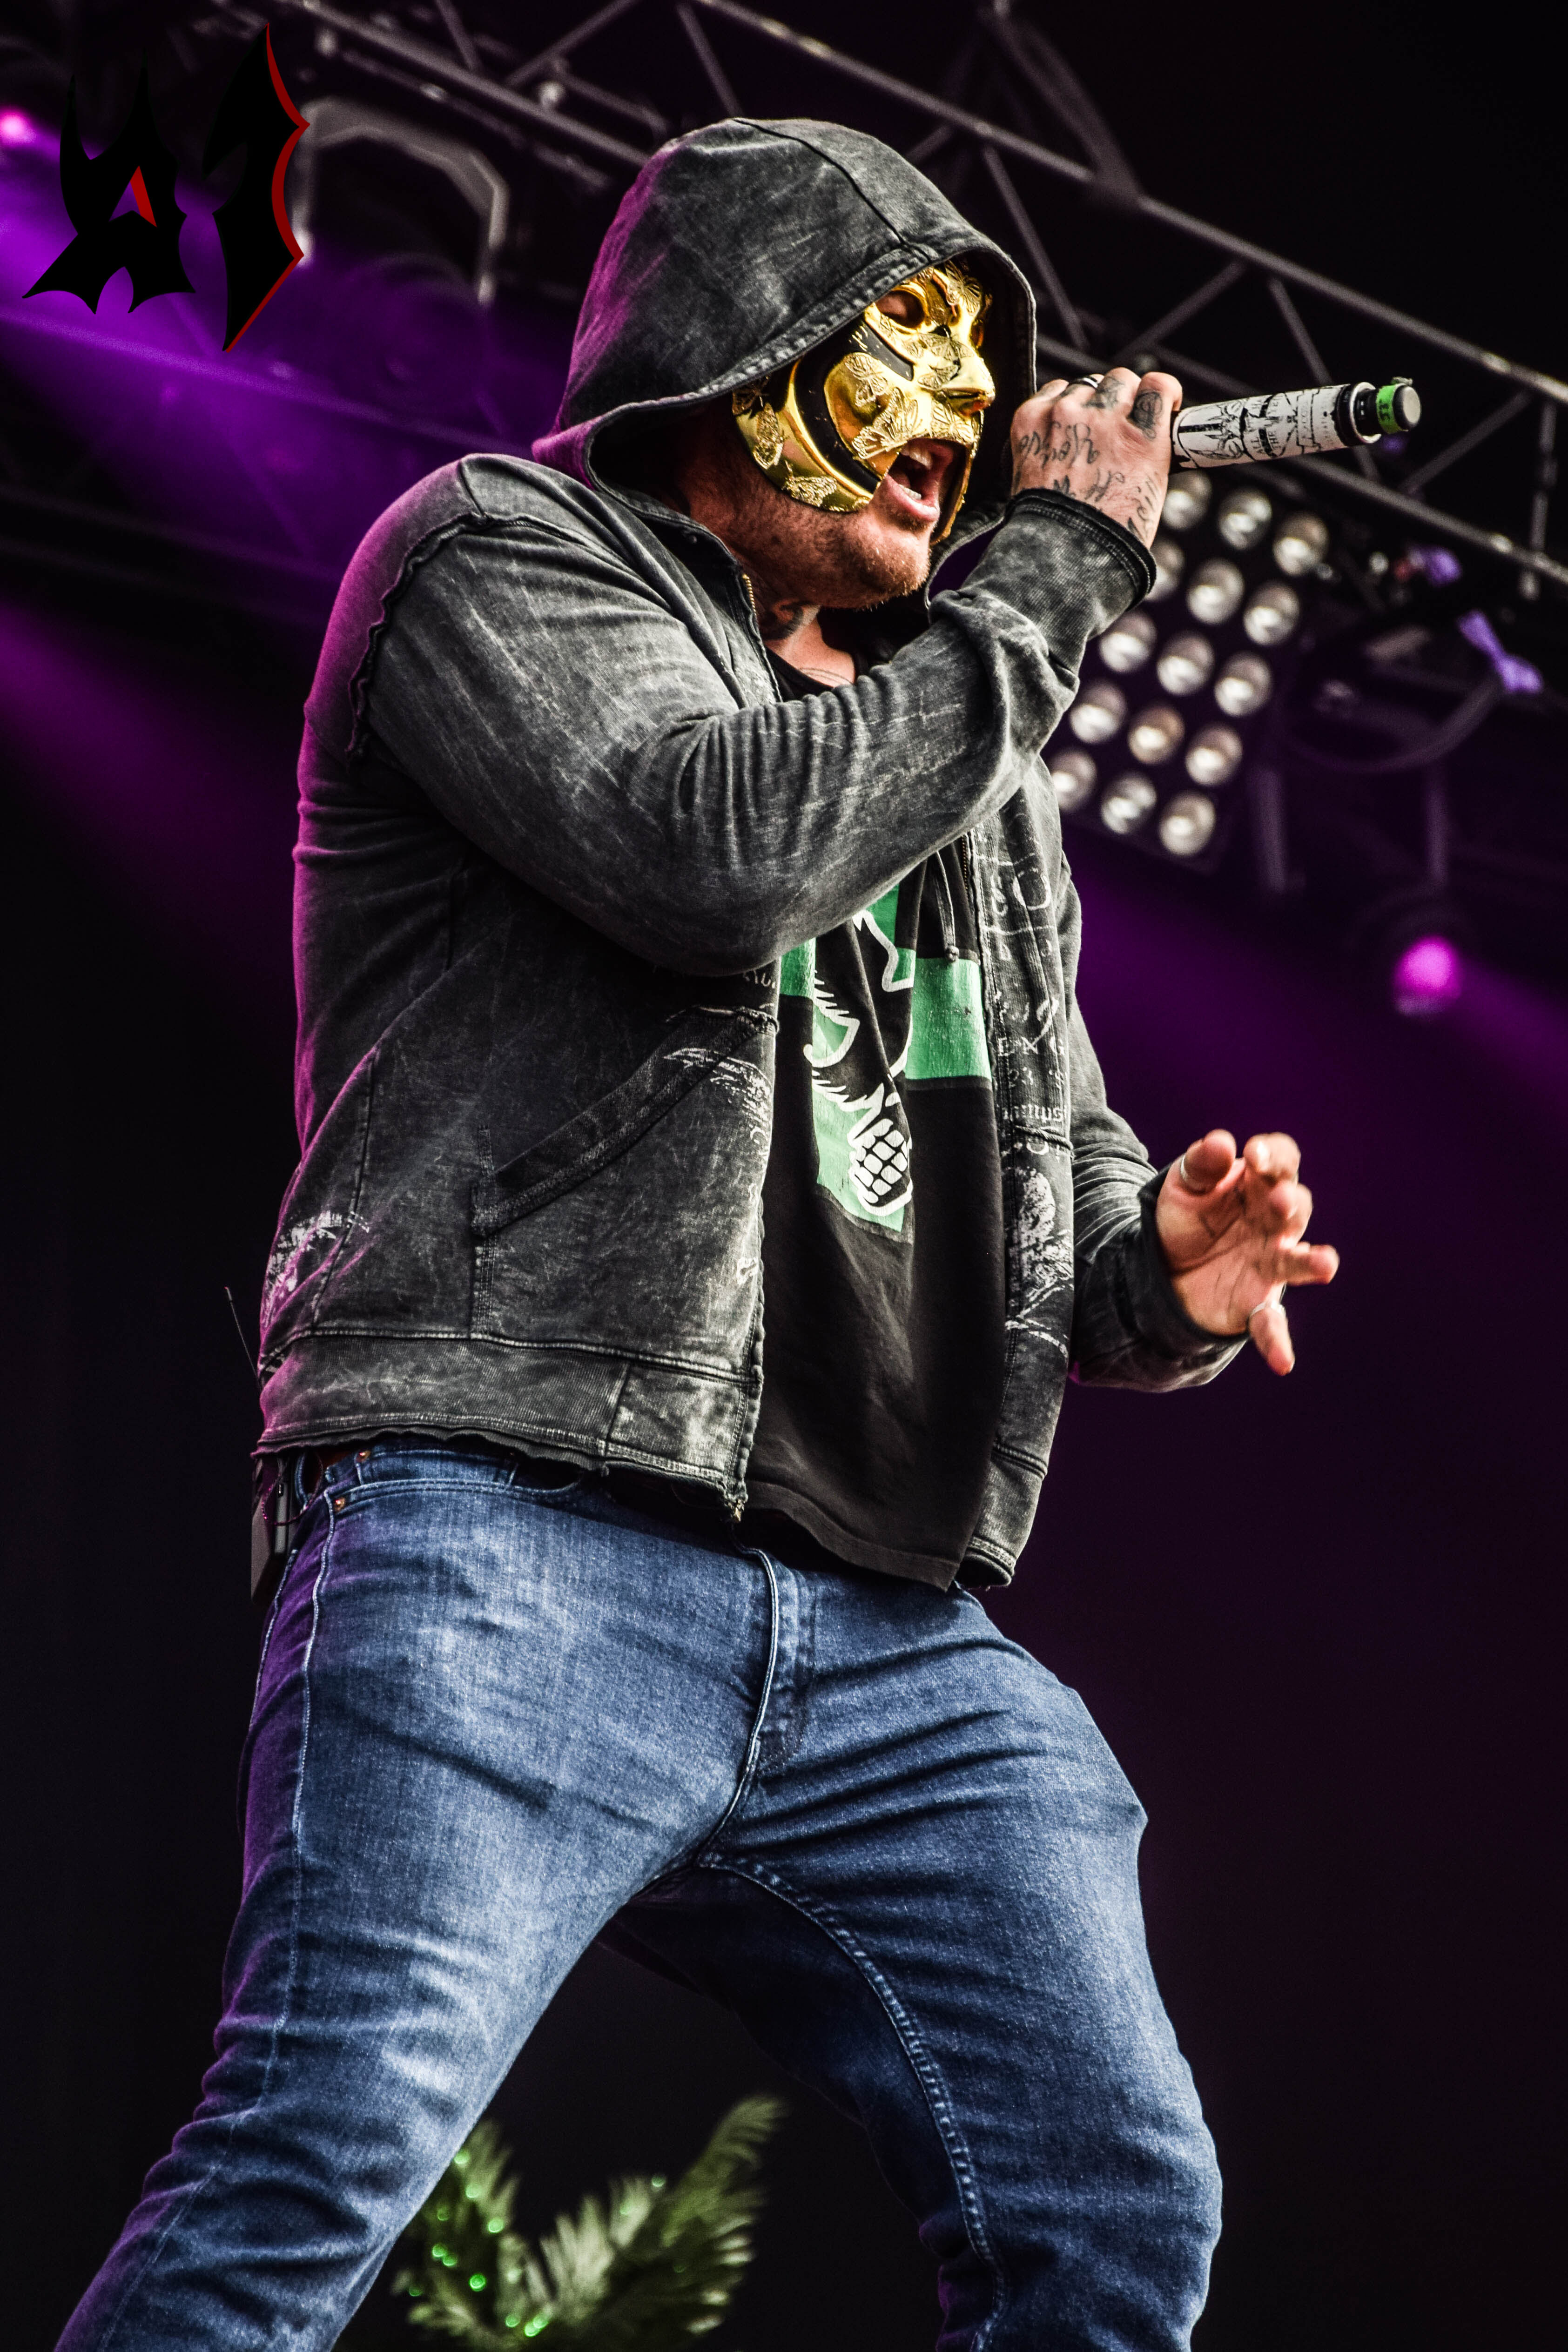 Donwload 2018 – Day 2 - Hollywood Undead 1